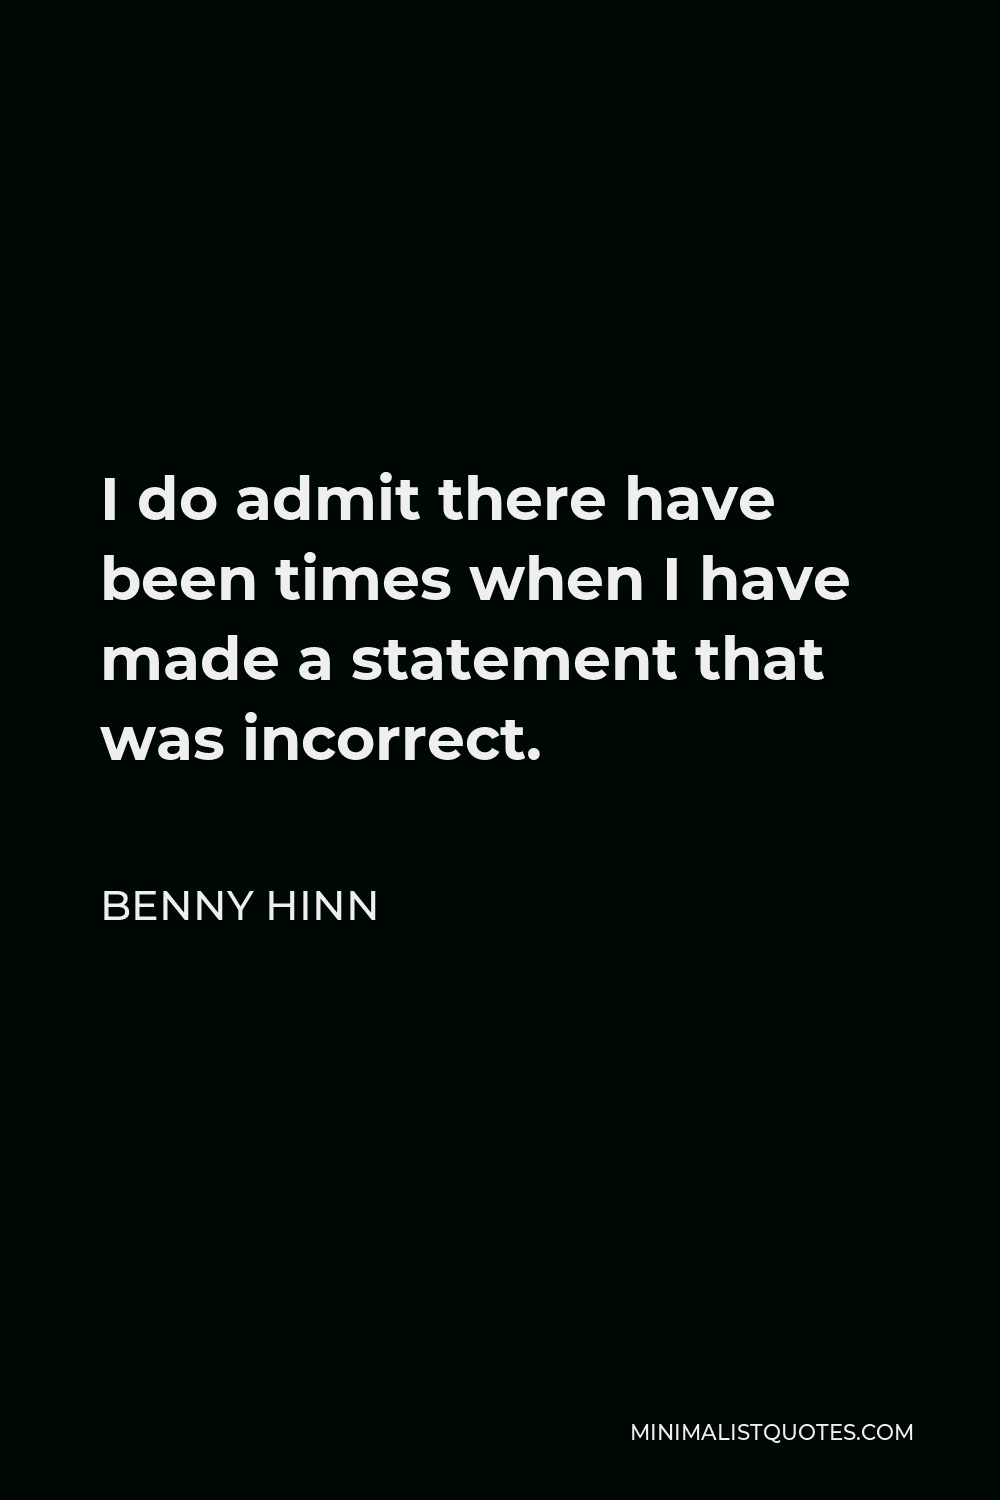 Benny Hinn Quote - I do admit there have been times when I have made a statement that was incorrect.